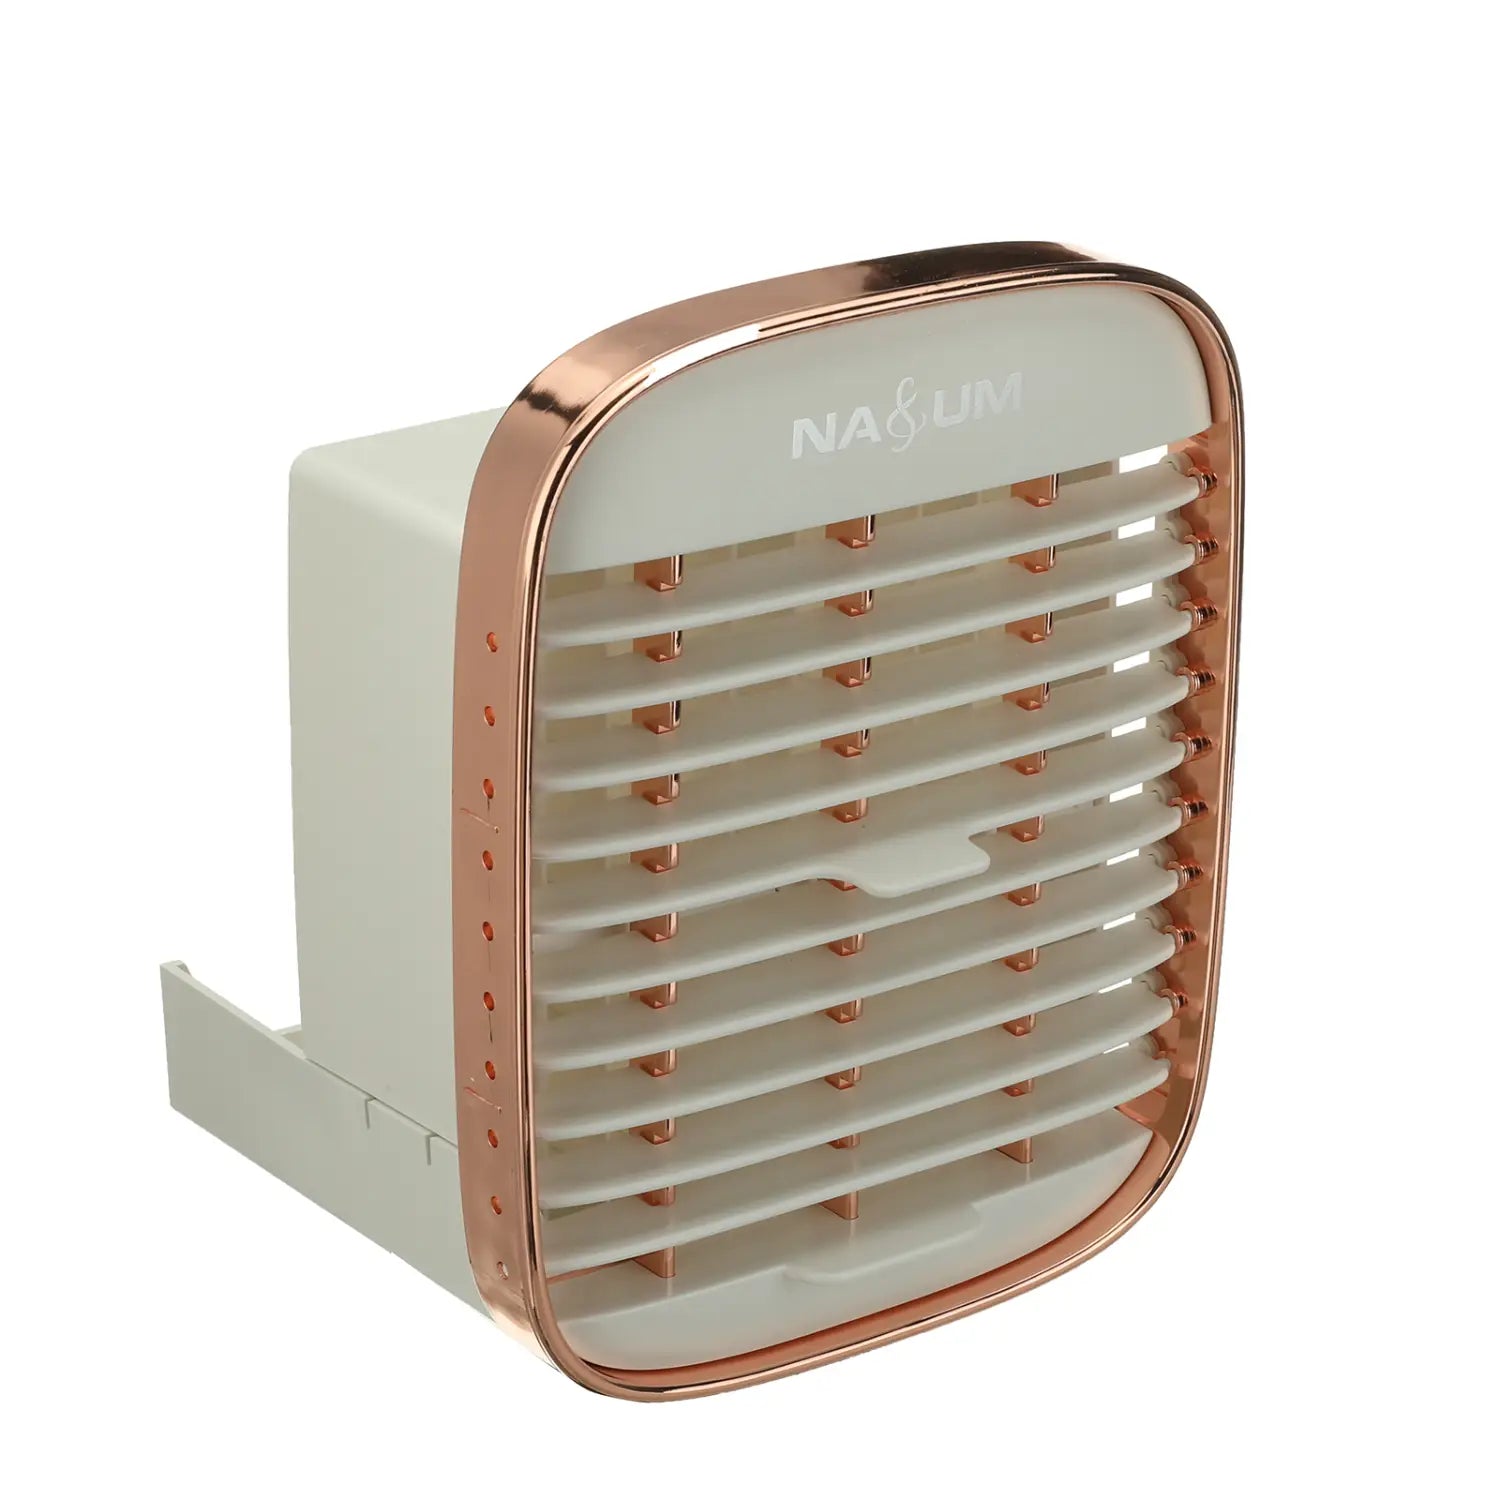 3-in-1 Mini Air Cooler Usb Portable Air-conditioning